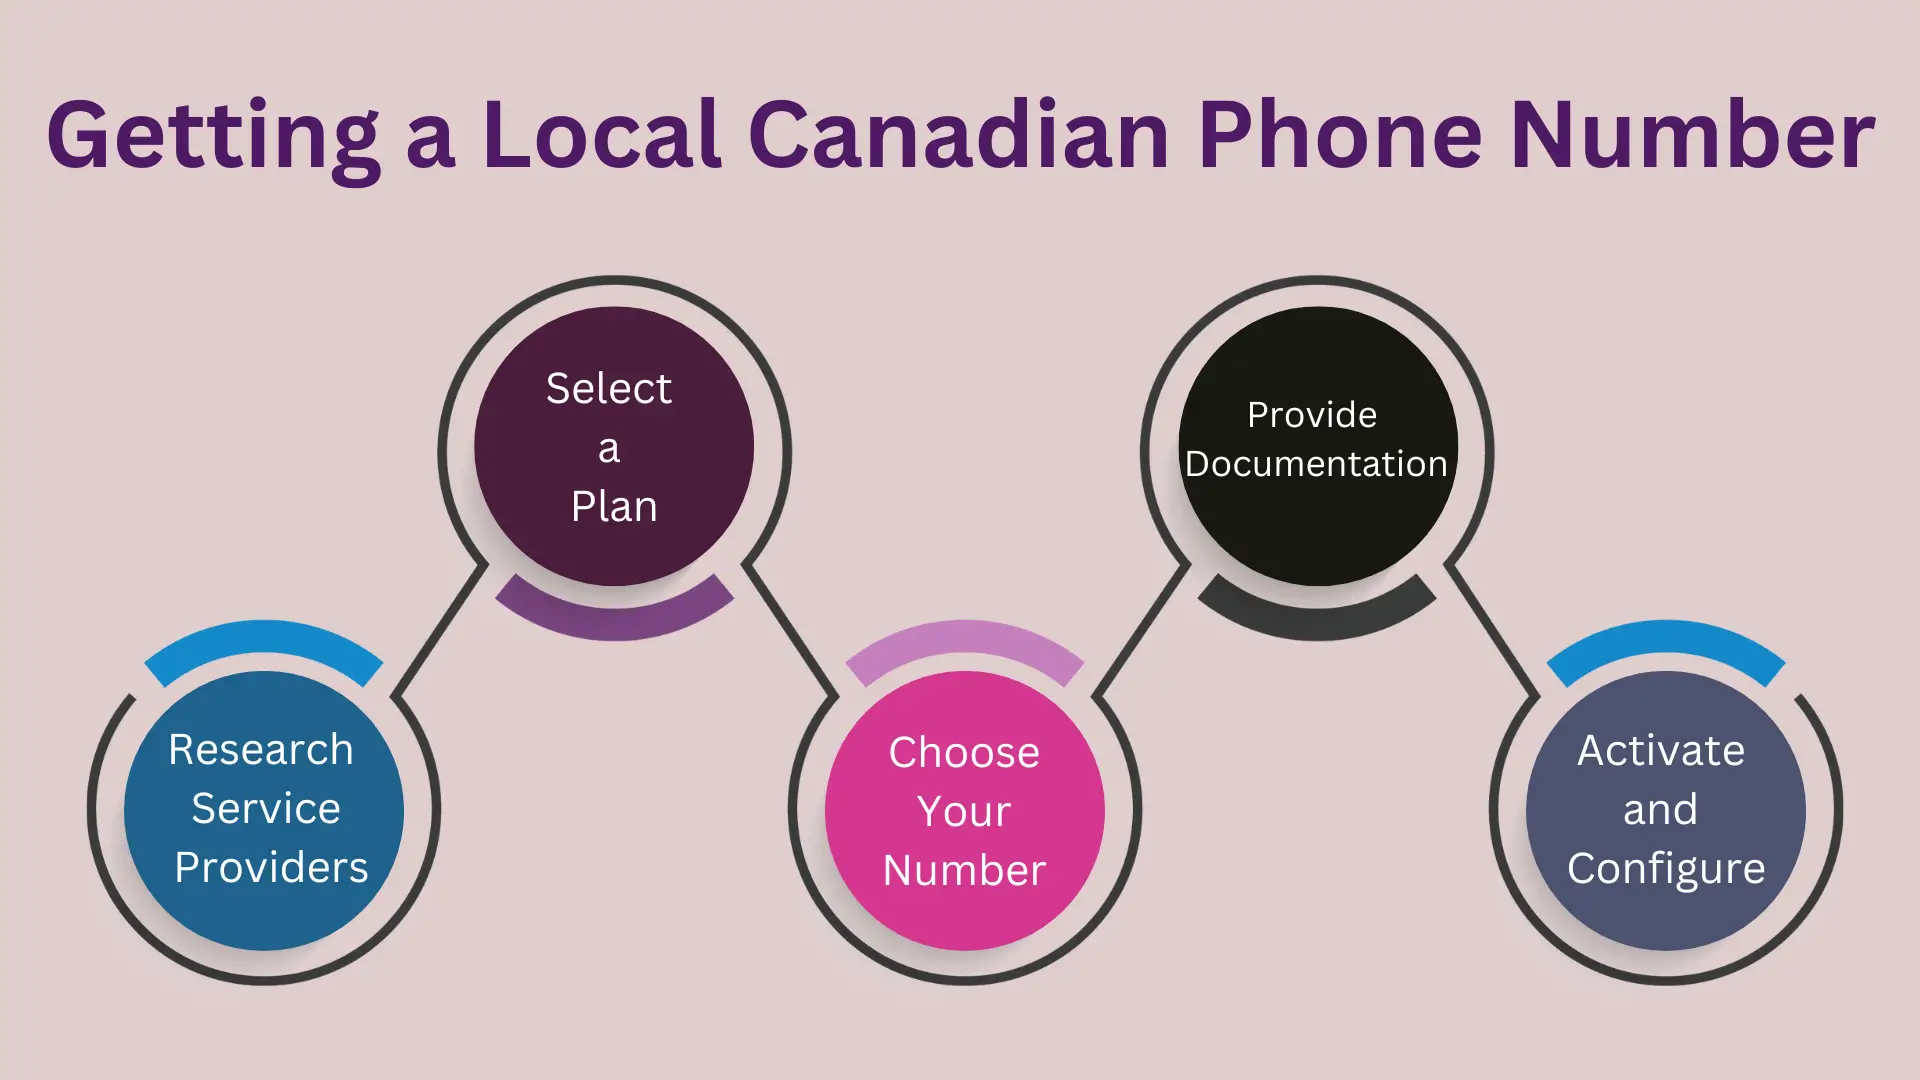 Getting a Local Canadian Phone Number